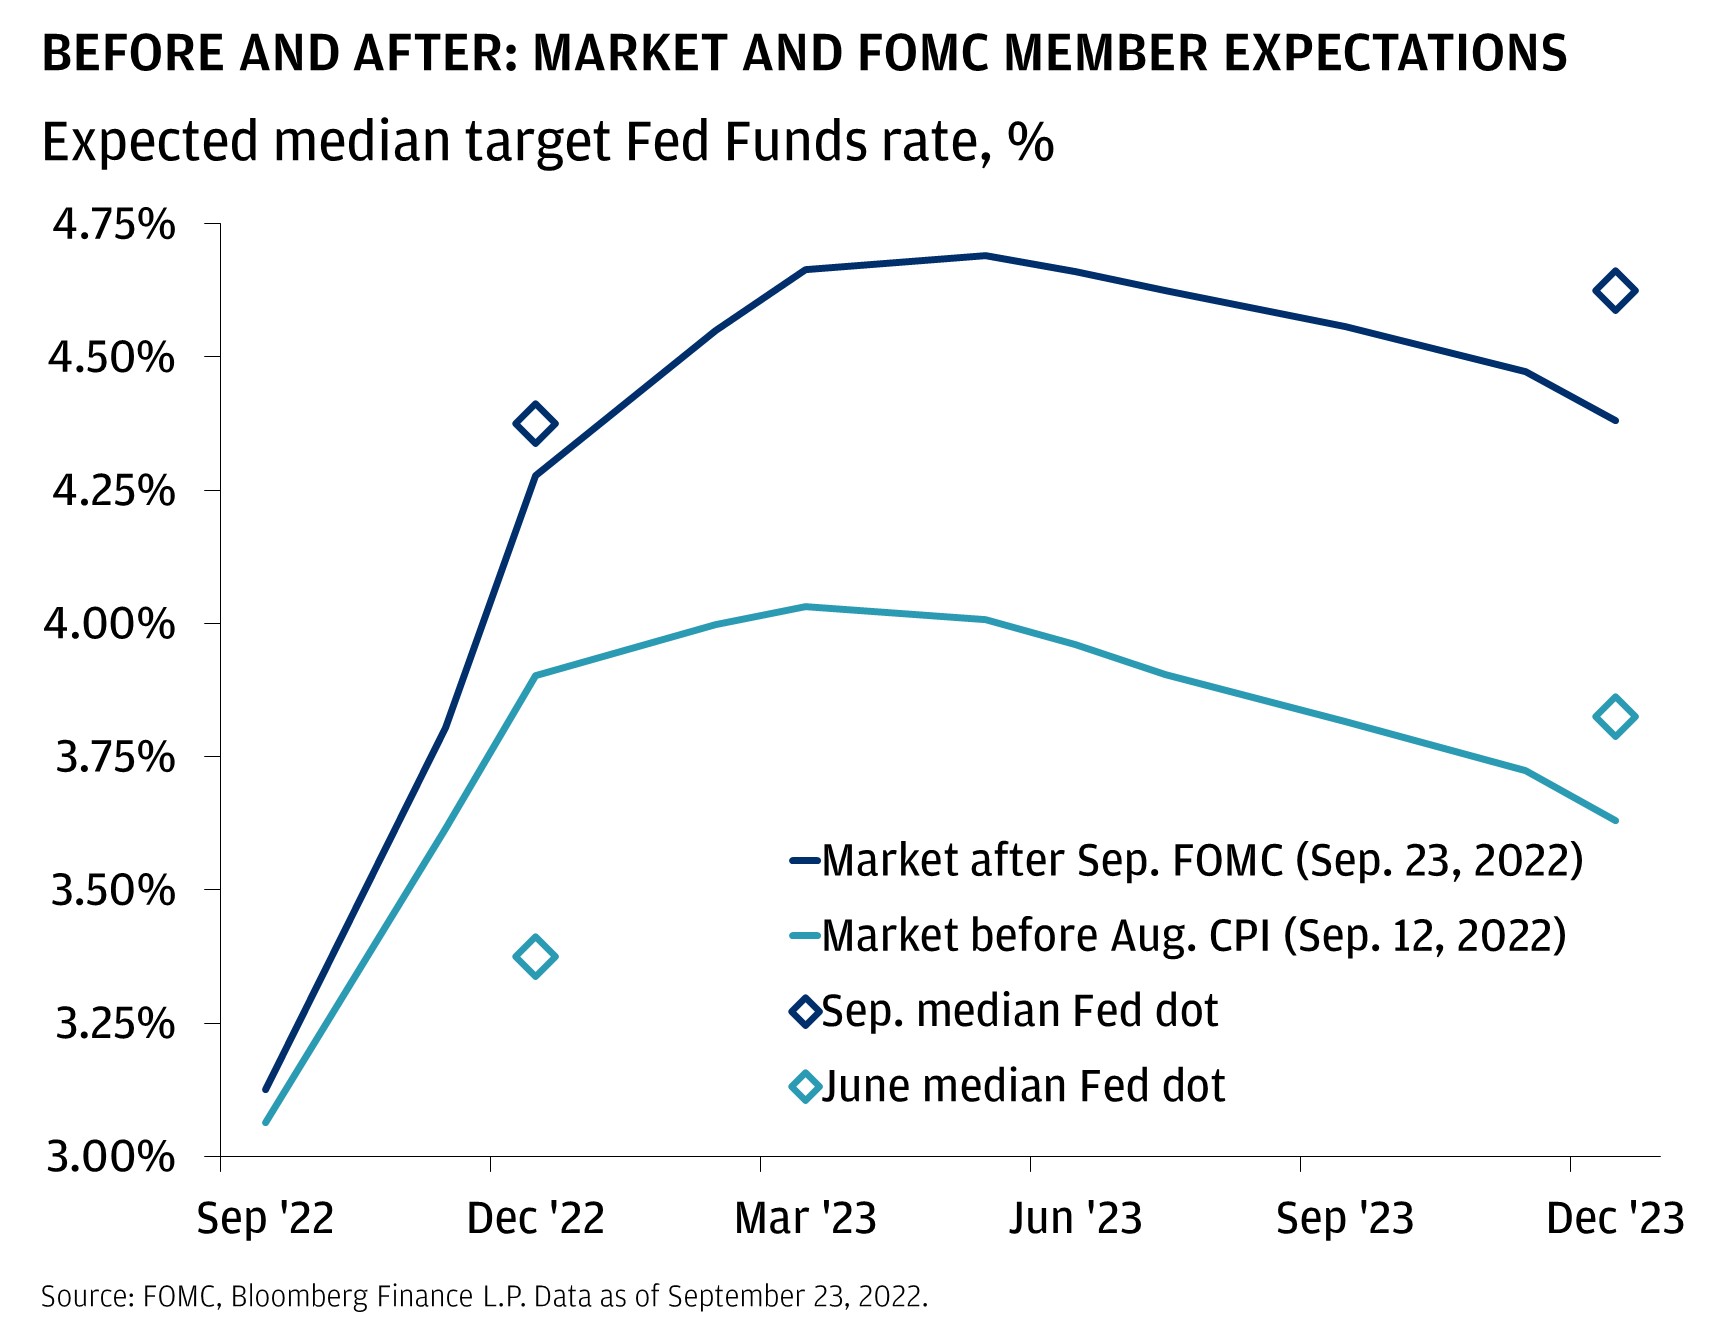 This chart shows the market expected median target Fed Funds rate before August CPI (on September 12, 2022) and after the September FOMC (September 23, 2022), and the June median Fed dot and September median Fed dot.